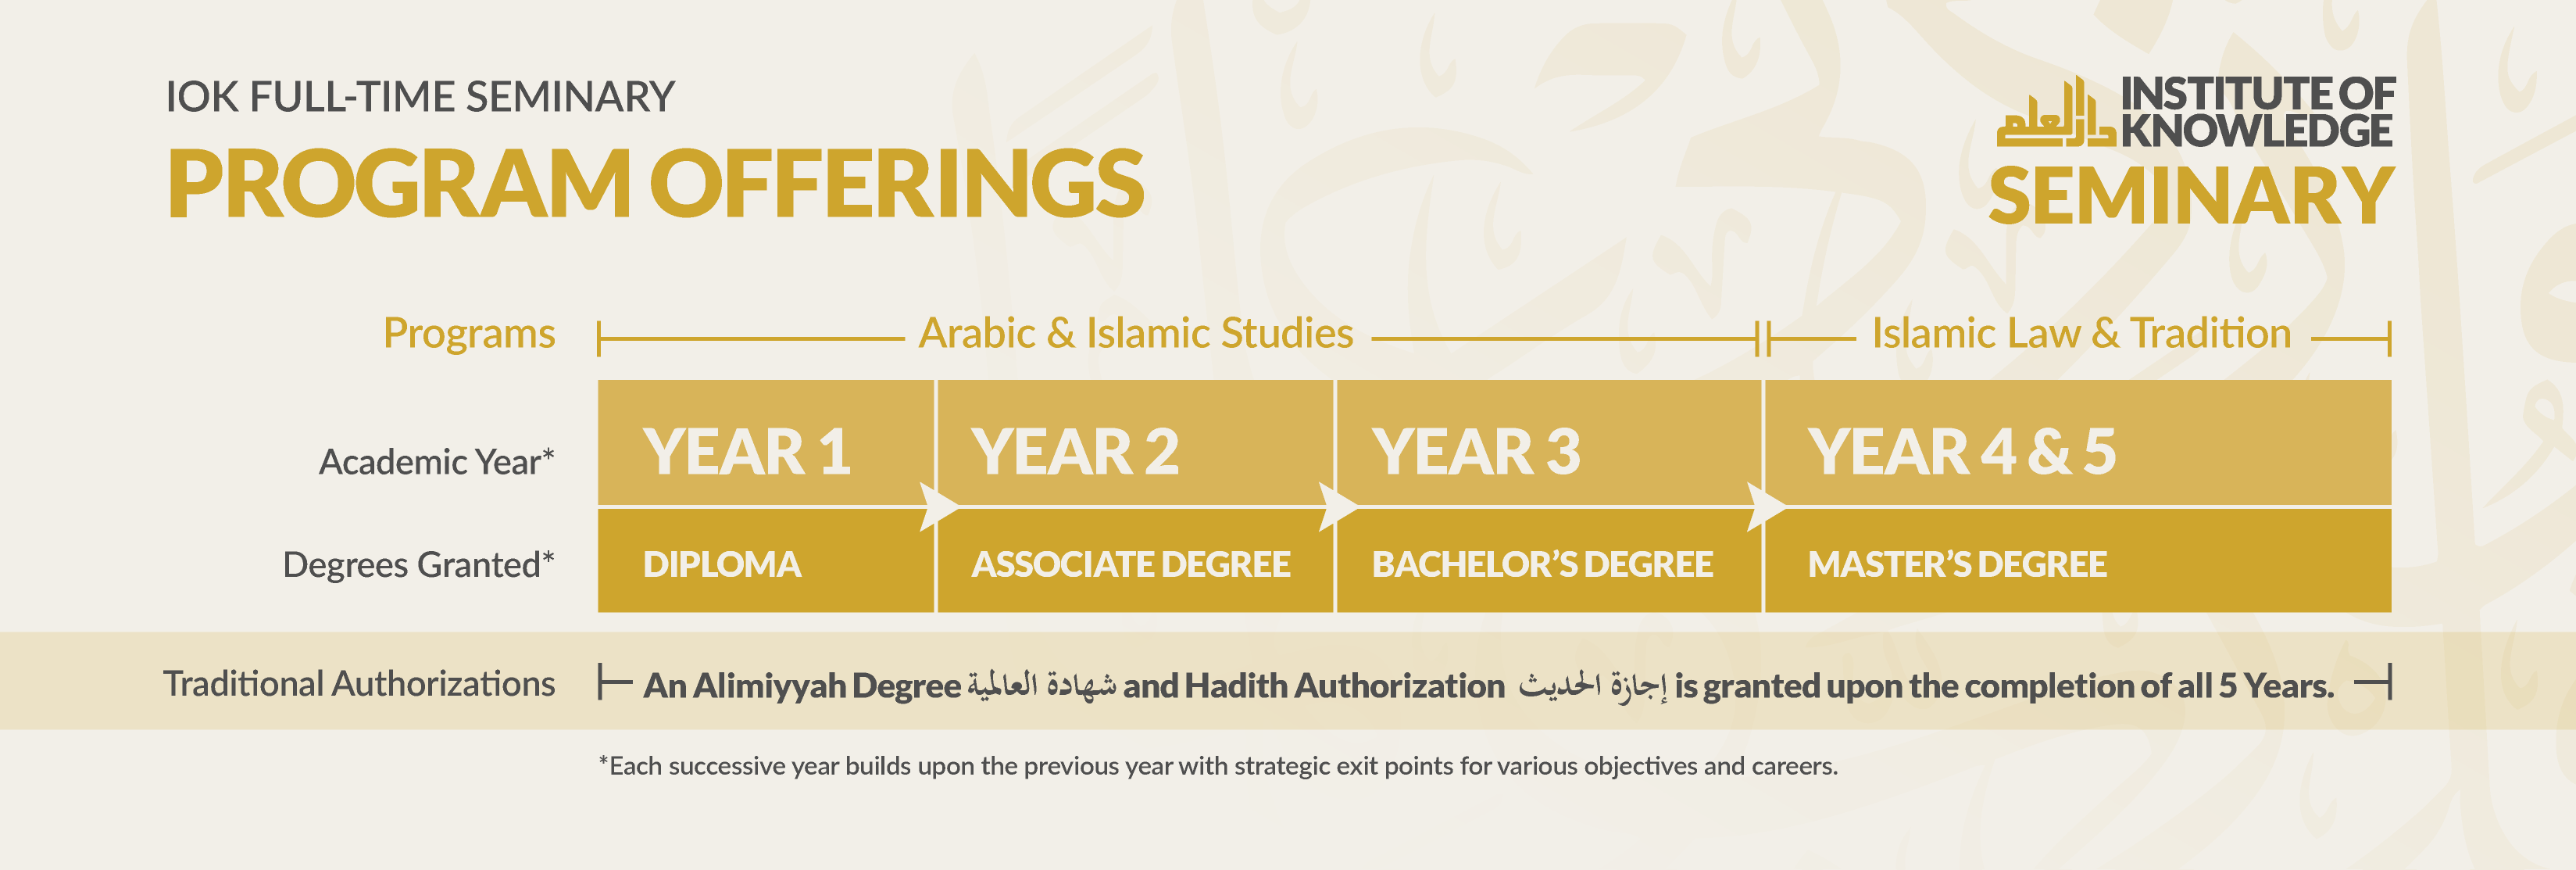 Diagram showing the IOK Full-Time Seminary Program Offerings with academic years and degrees granted, including Diploma, Associate Degree, Bachelor's Degree, and Master's Degree.